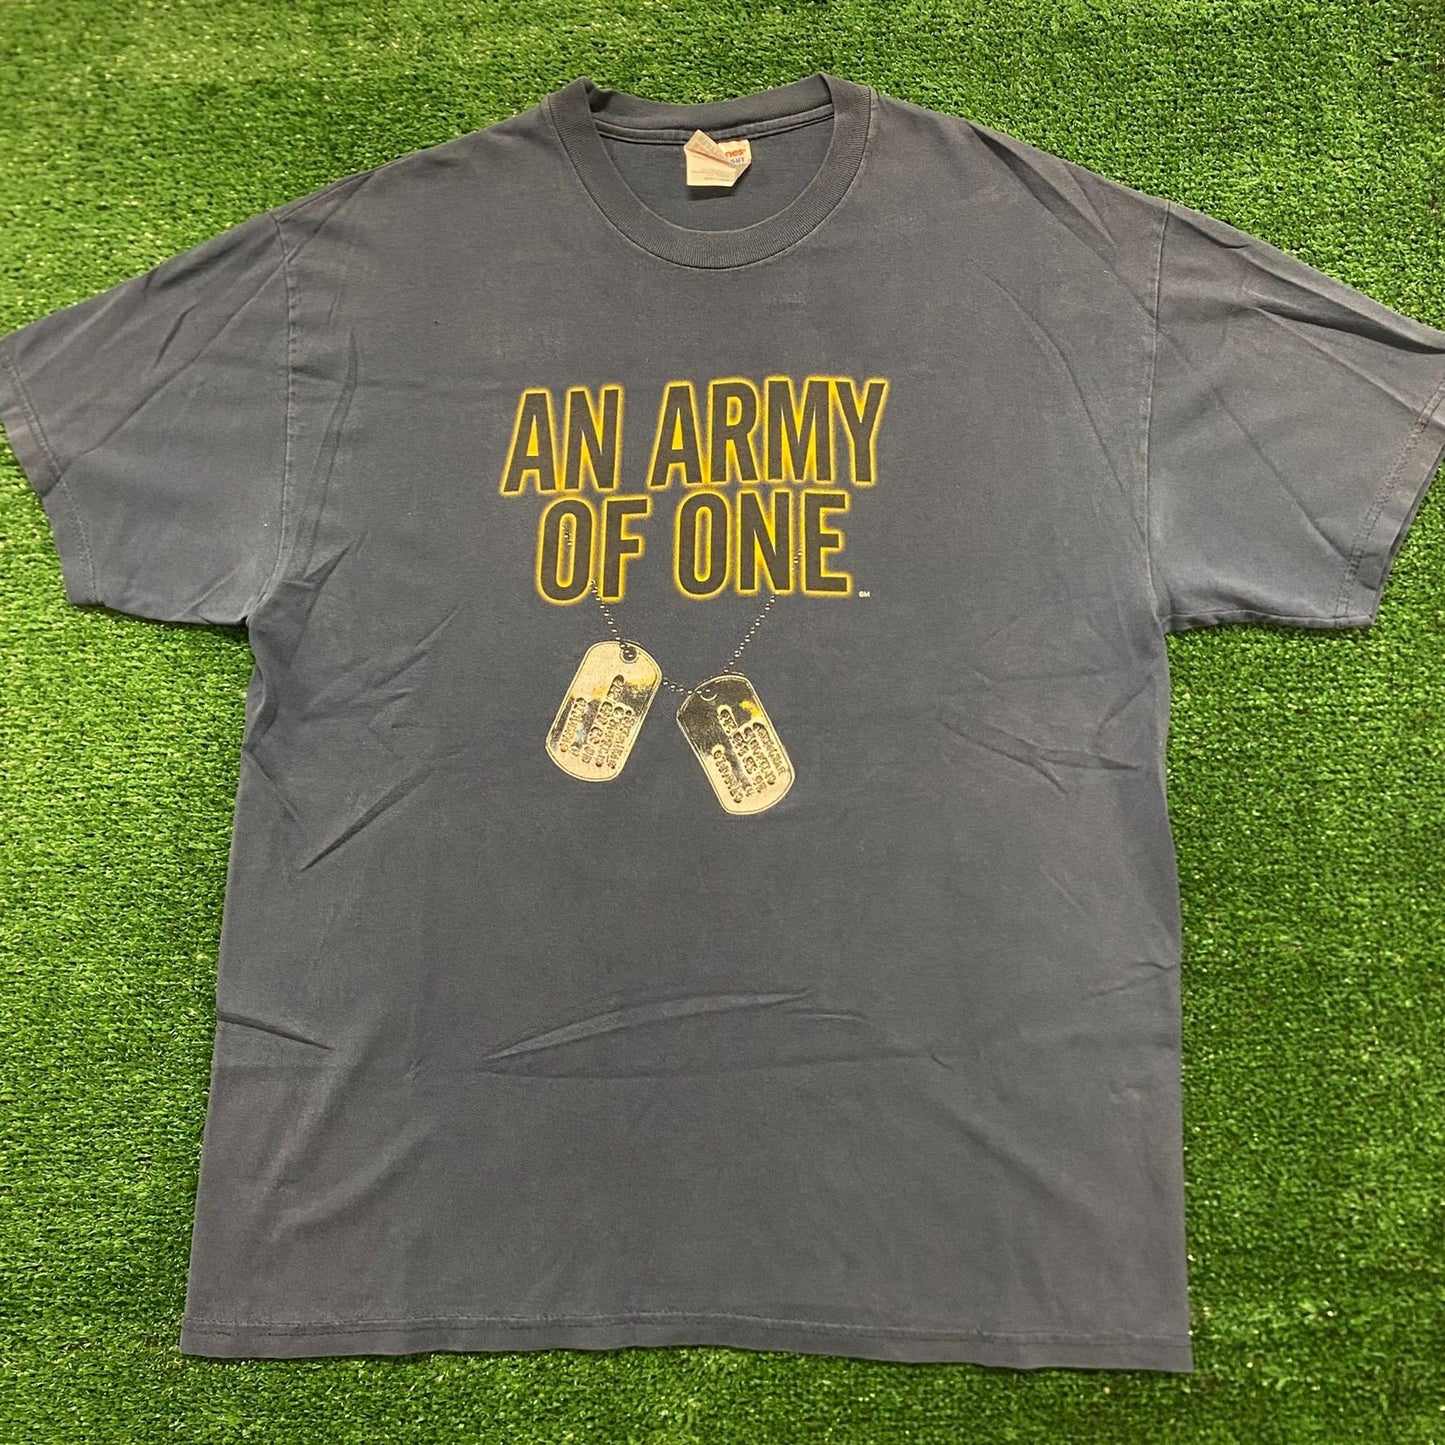 One Man Army Dog Tags Vintage Military T-Shirt